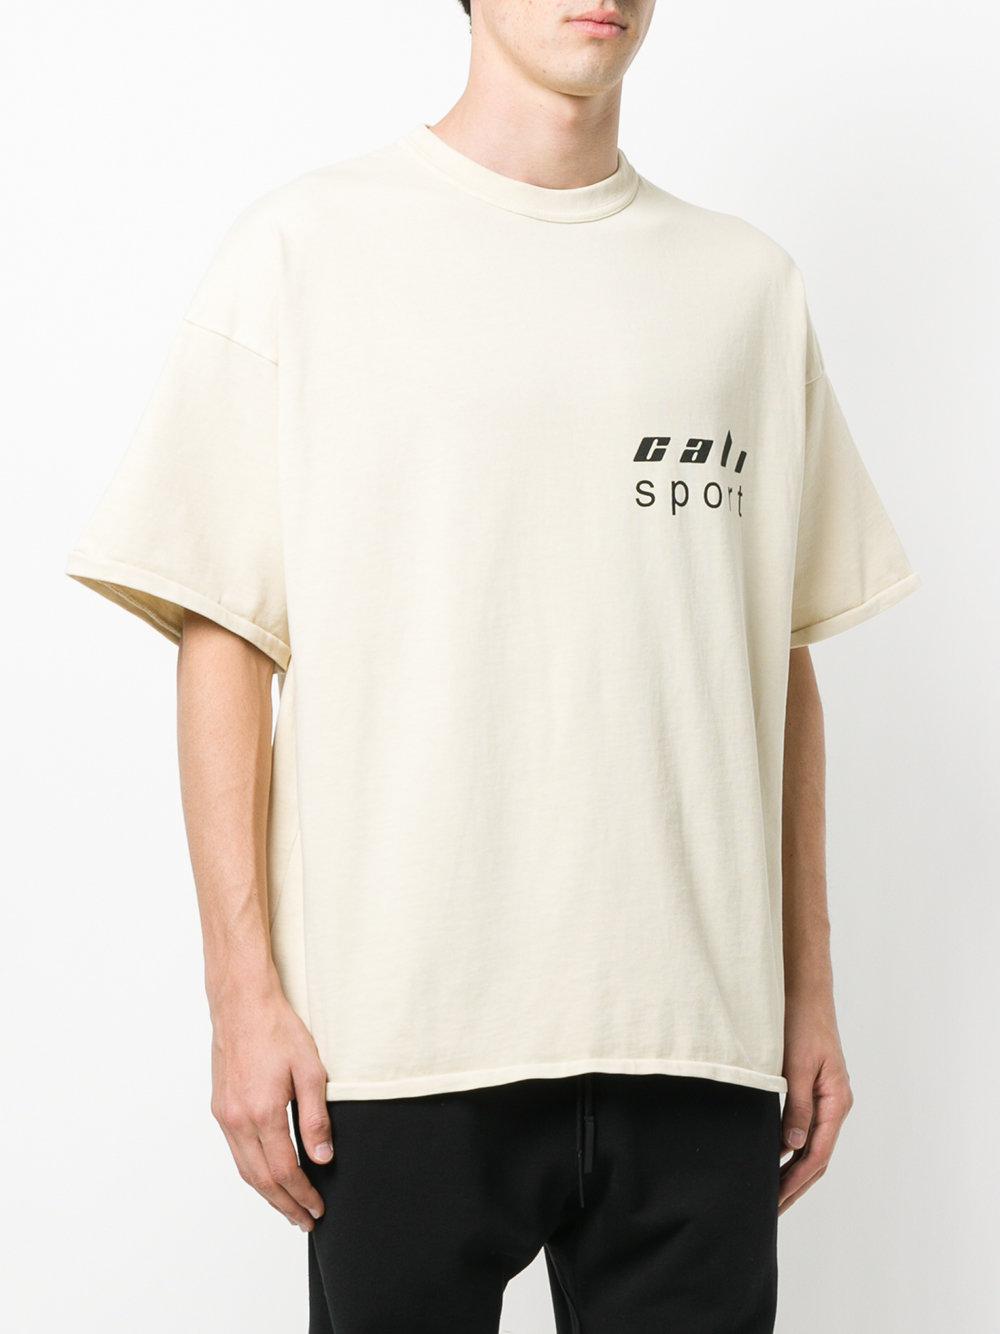 Yeezy Cotton Cali Sport T-shirt in Natural for Men - Lyst